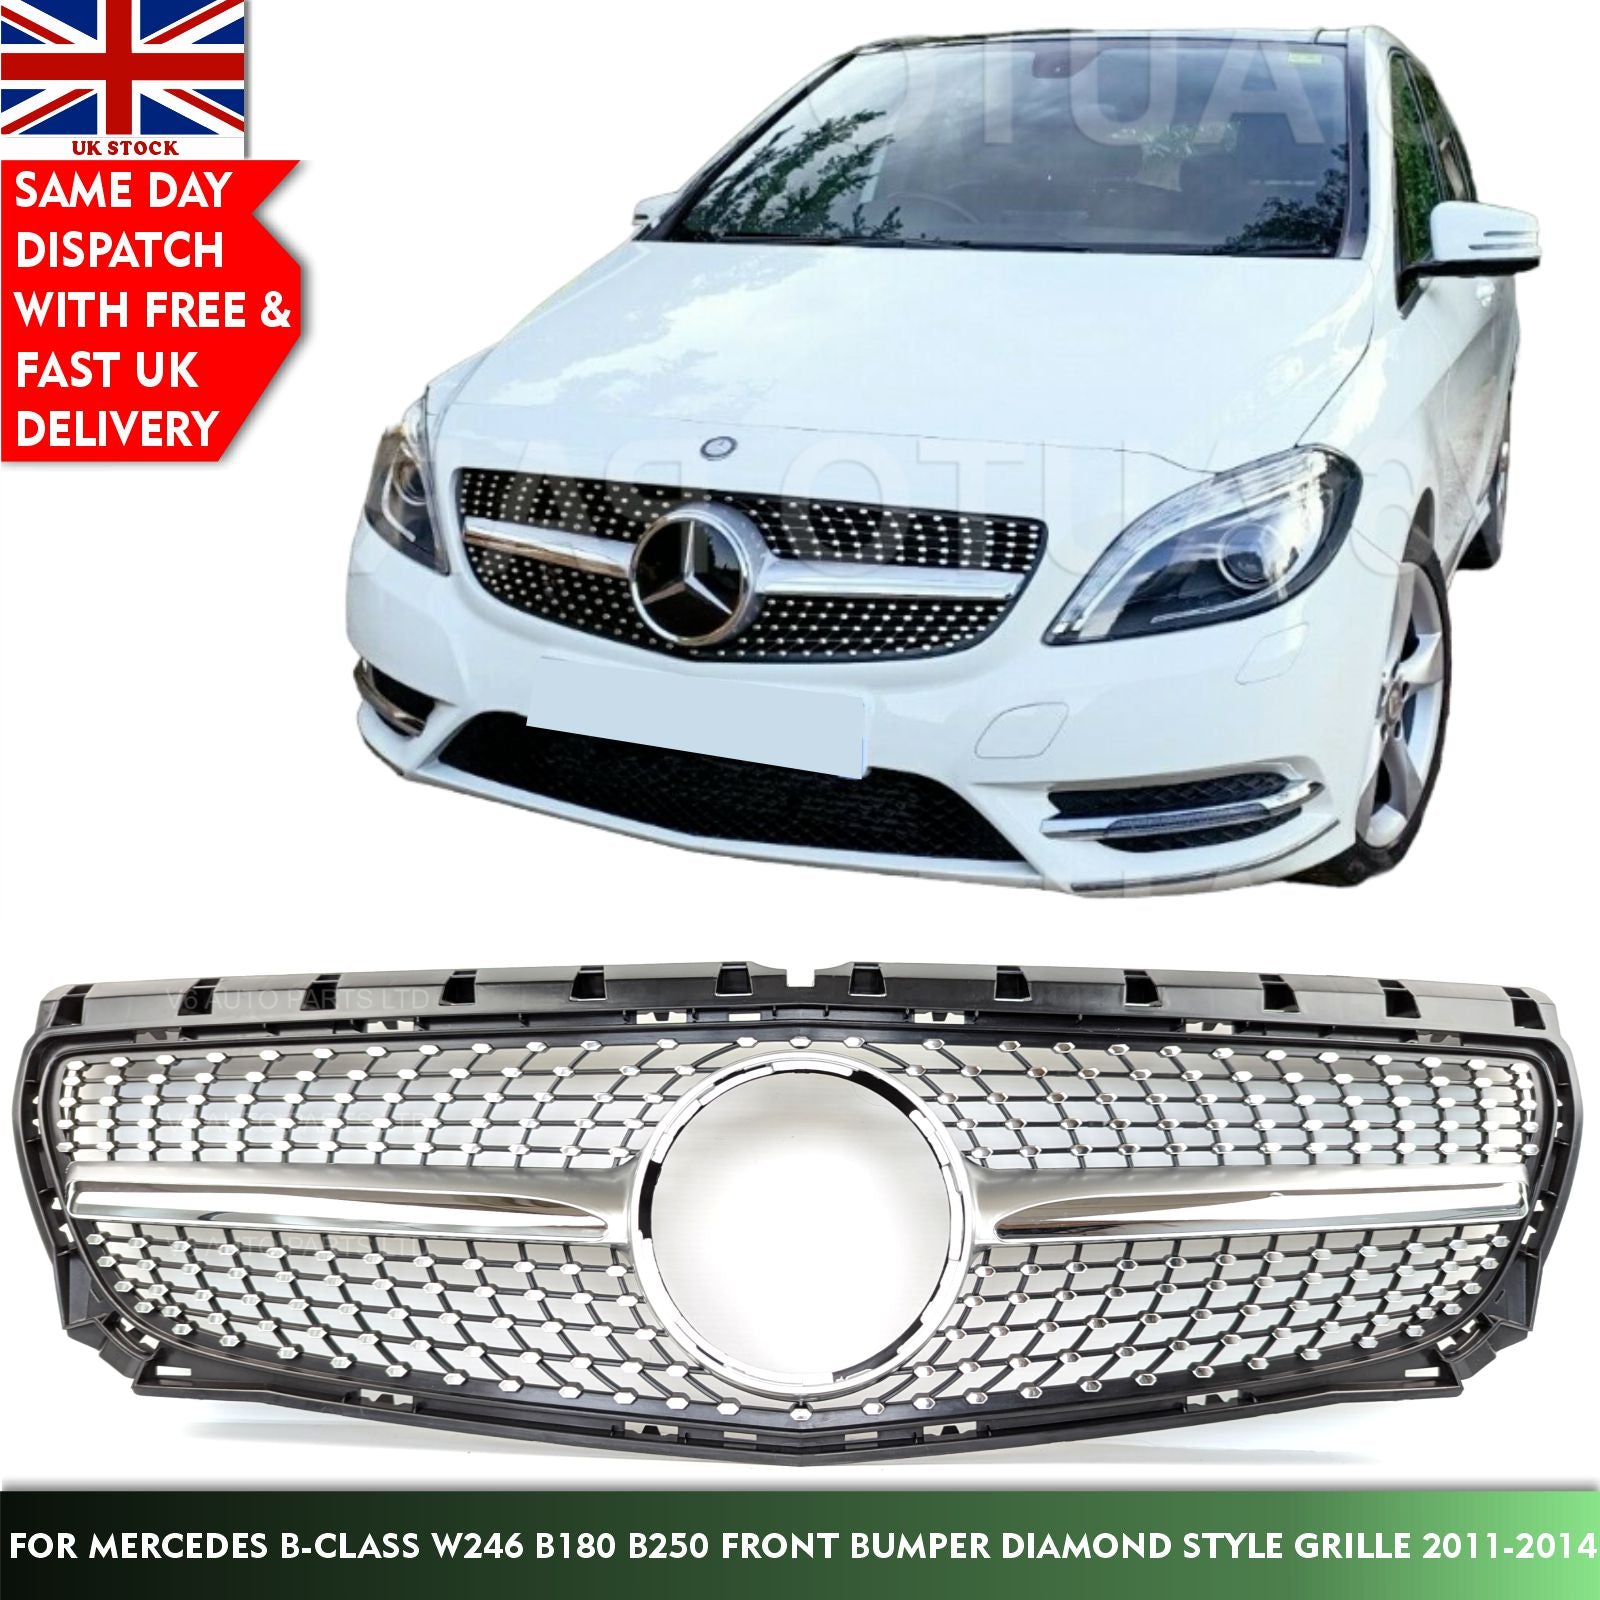 For Mercedes B-Class W246 B180 B250 Front Bumper Diamond Style Grille 2011-2014